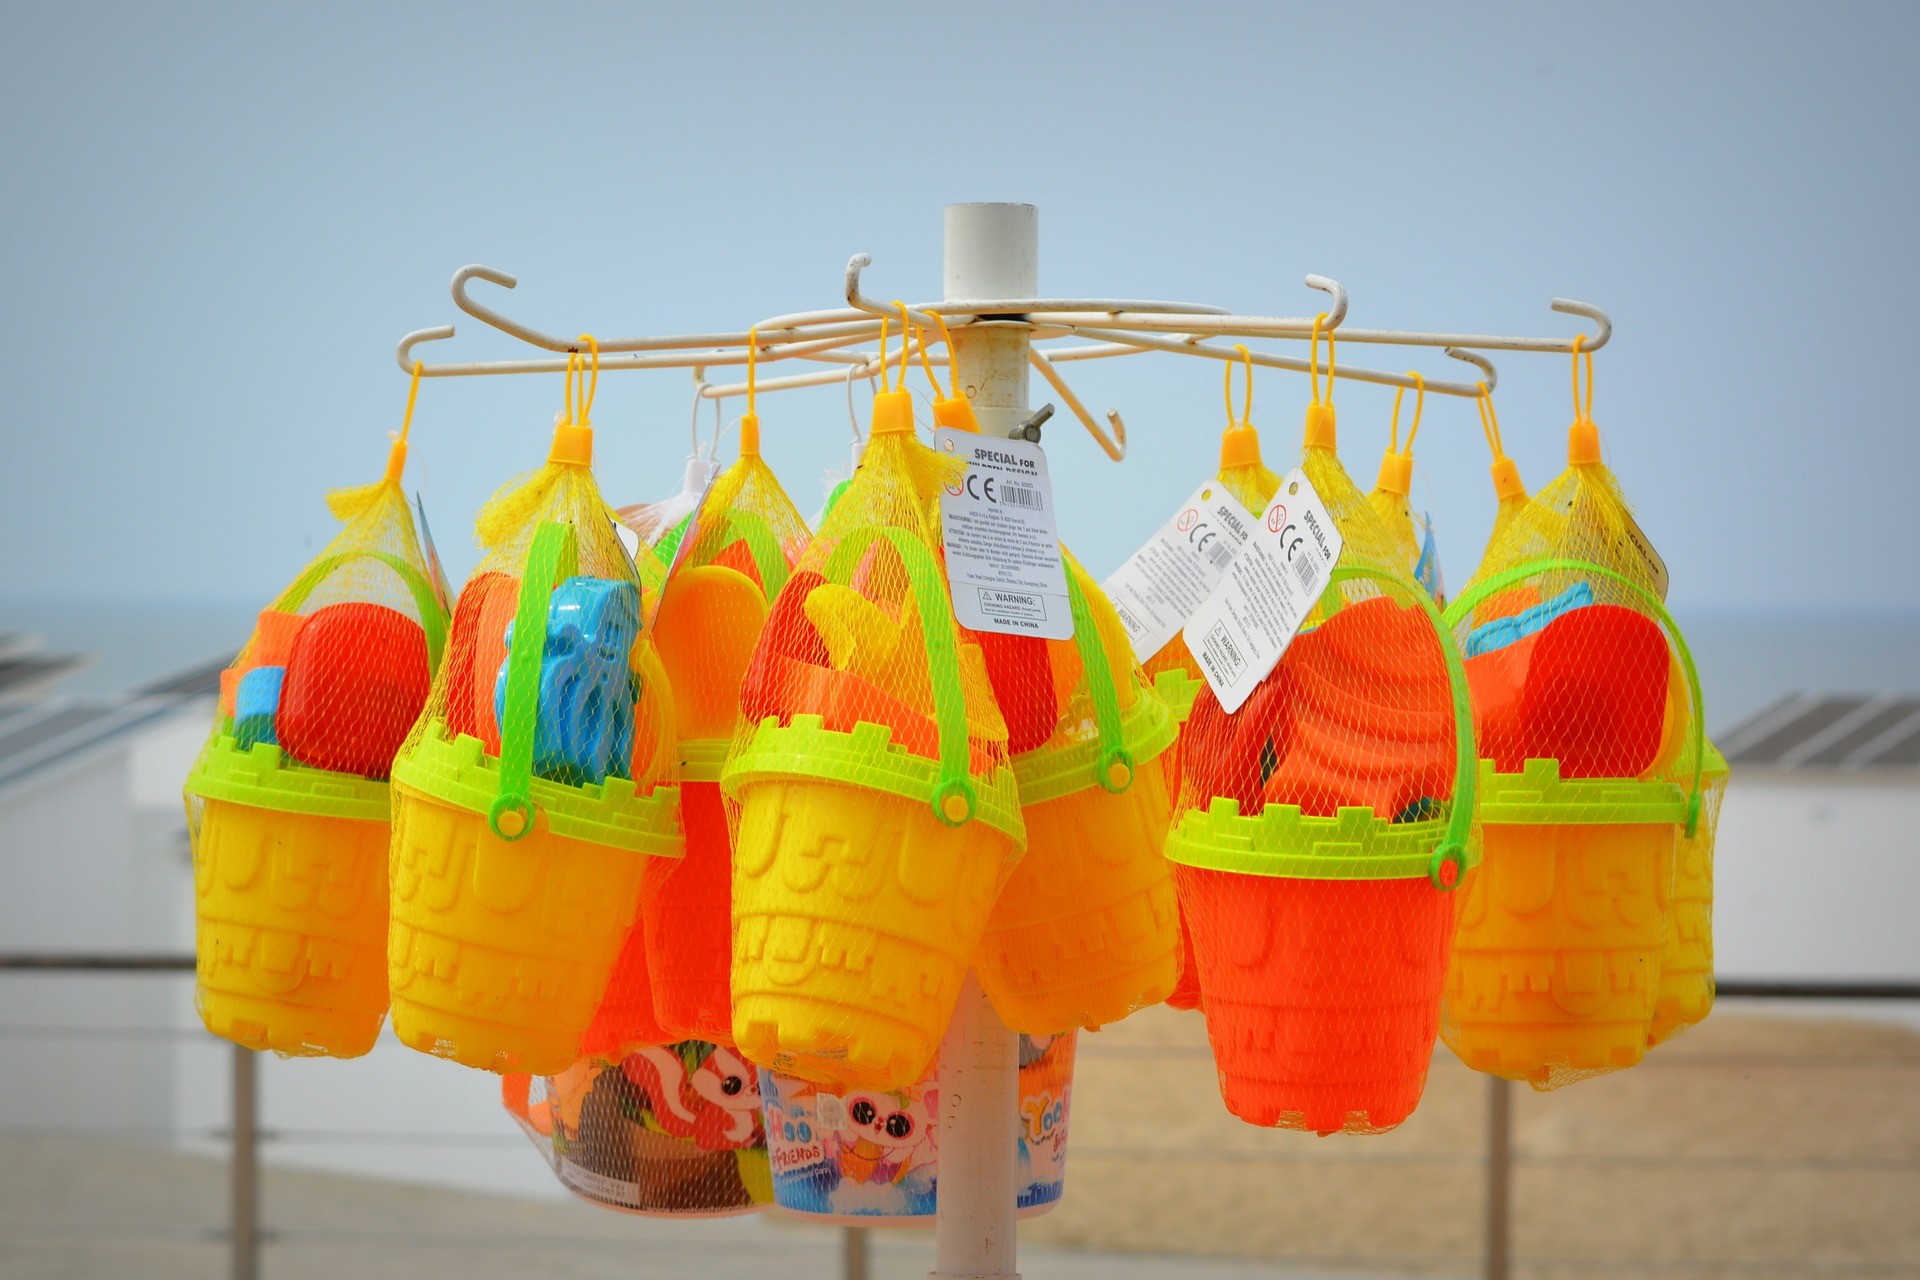 stand selling beach toys